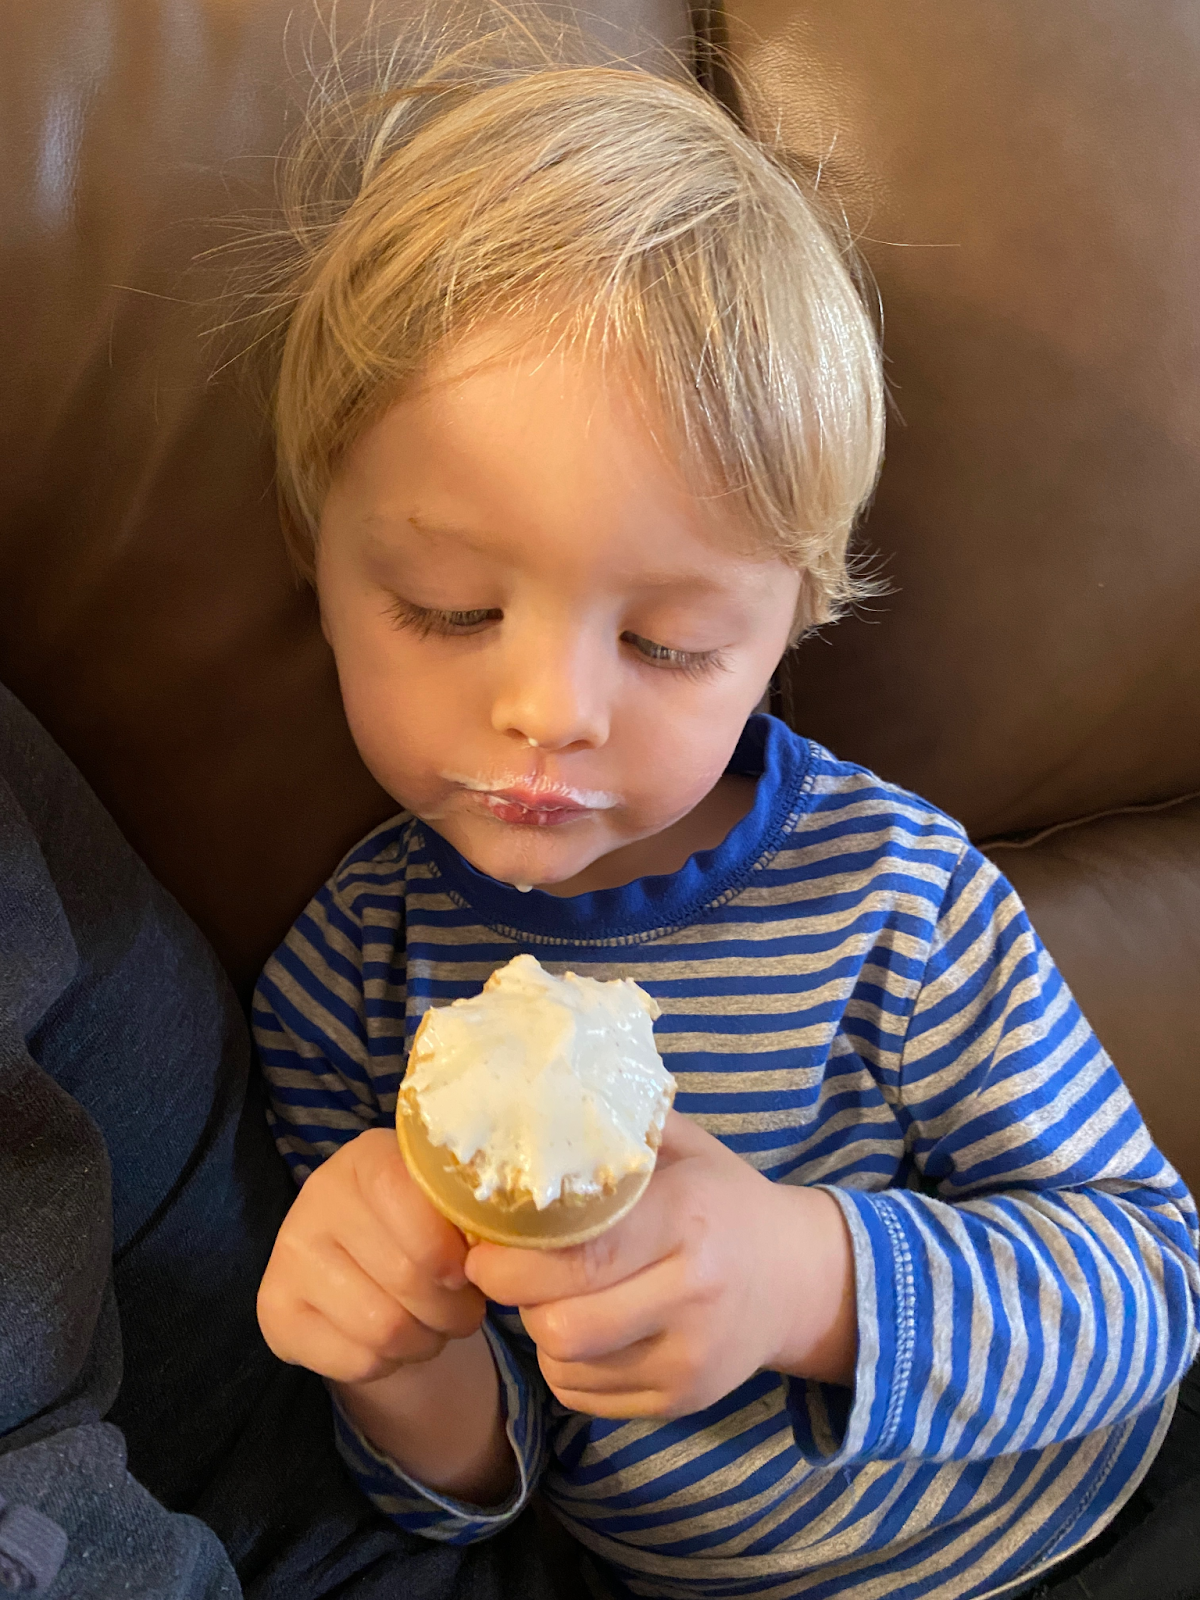 Toddler on the sofa wearing a striped shirt with an ice cream cone in his hands and ice cream on his face